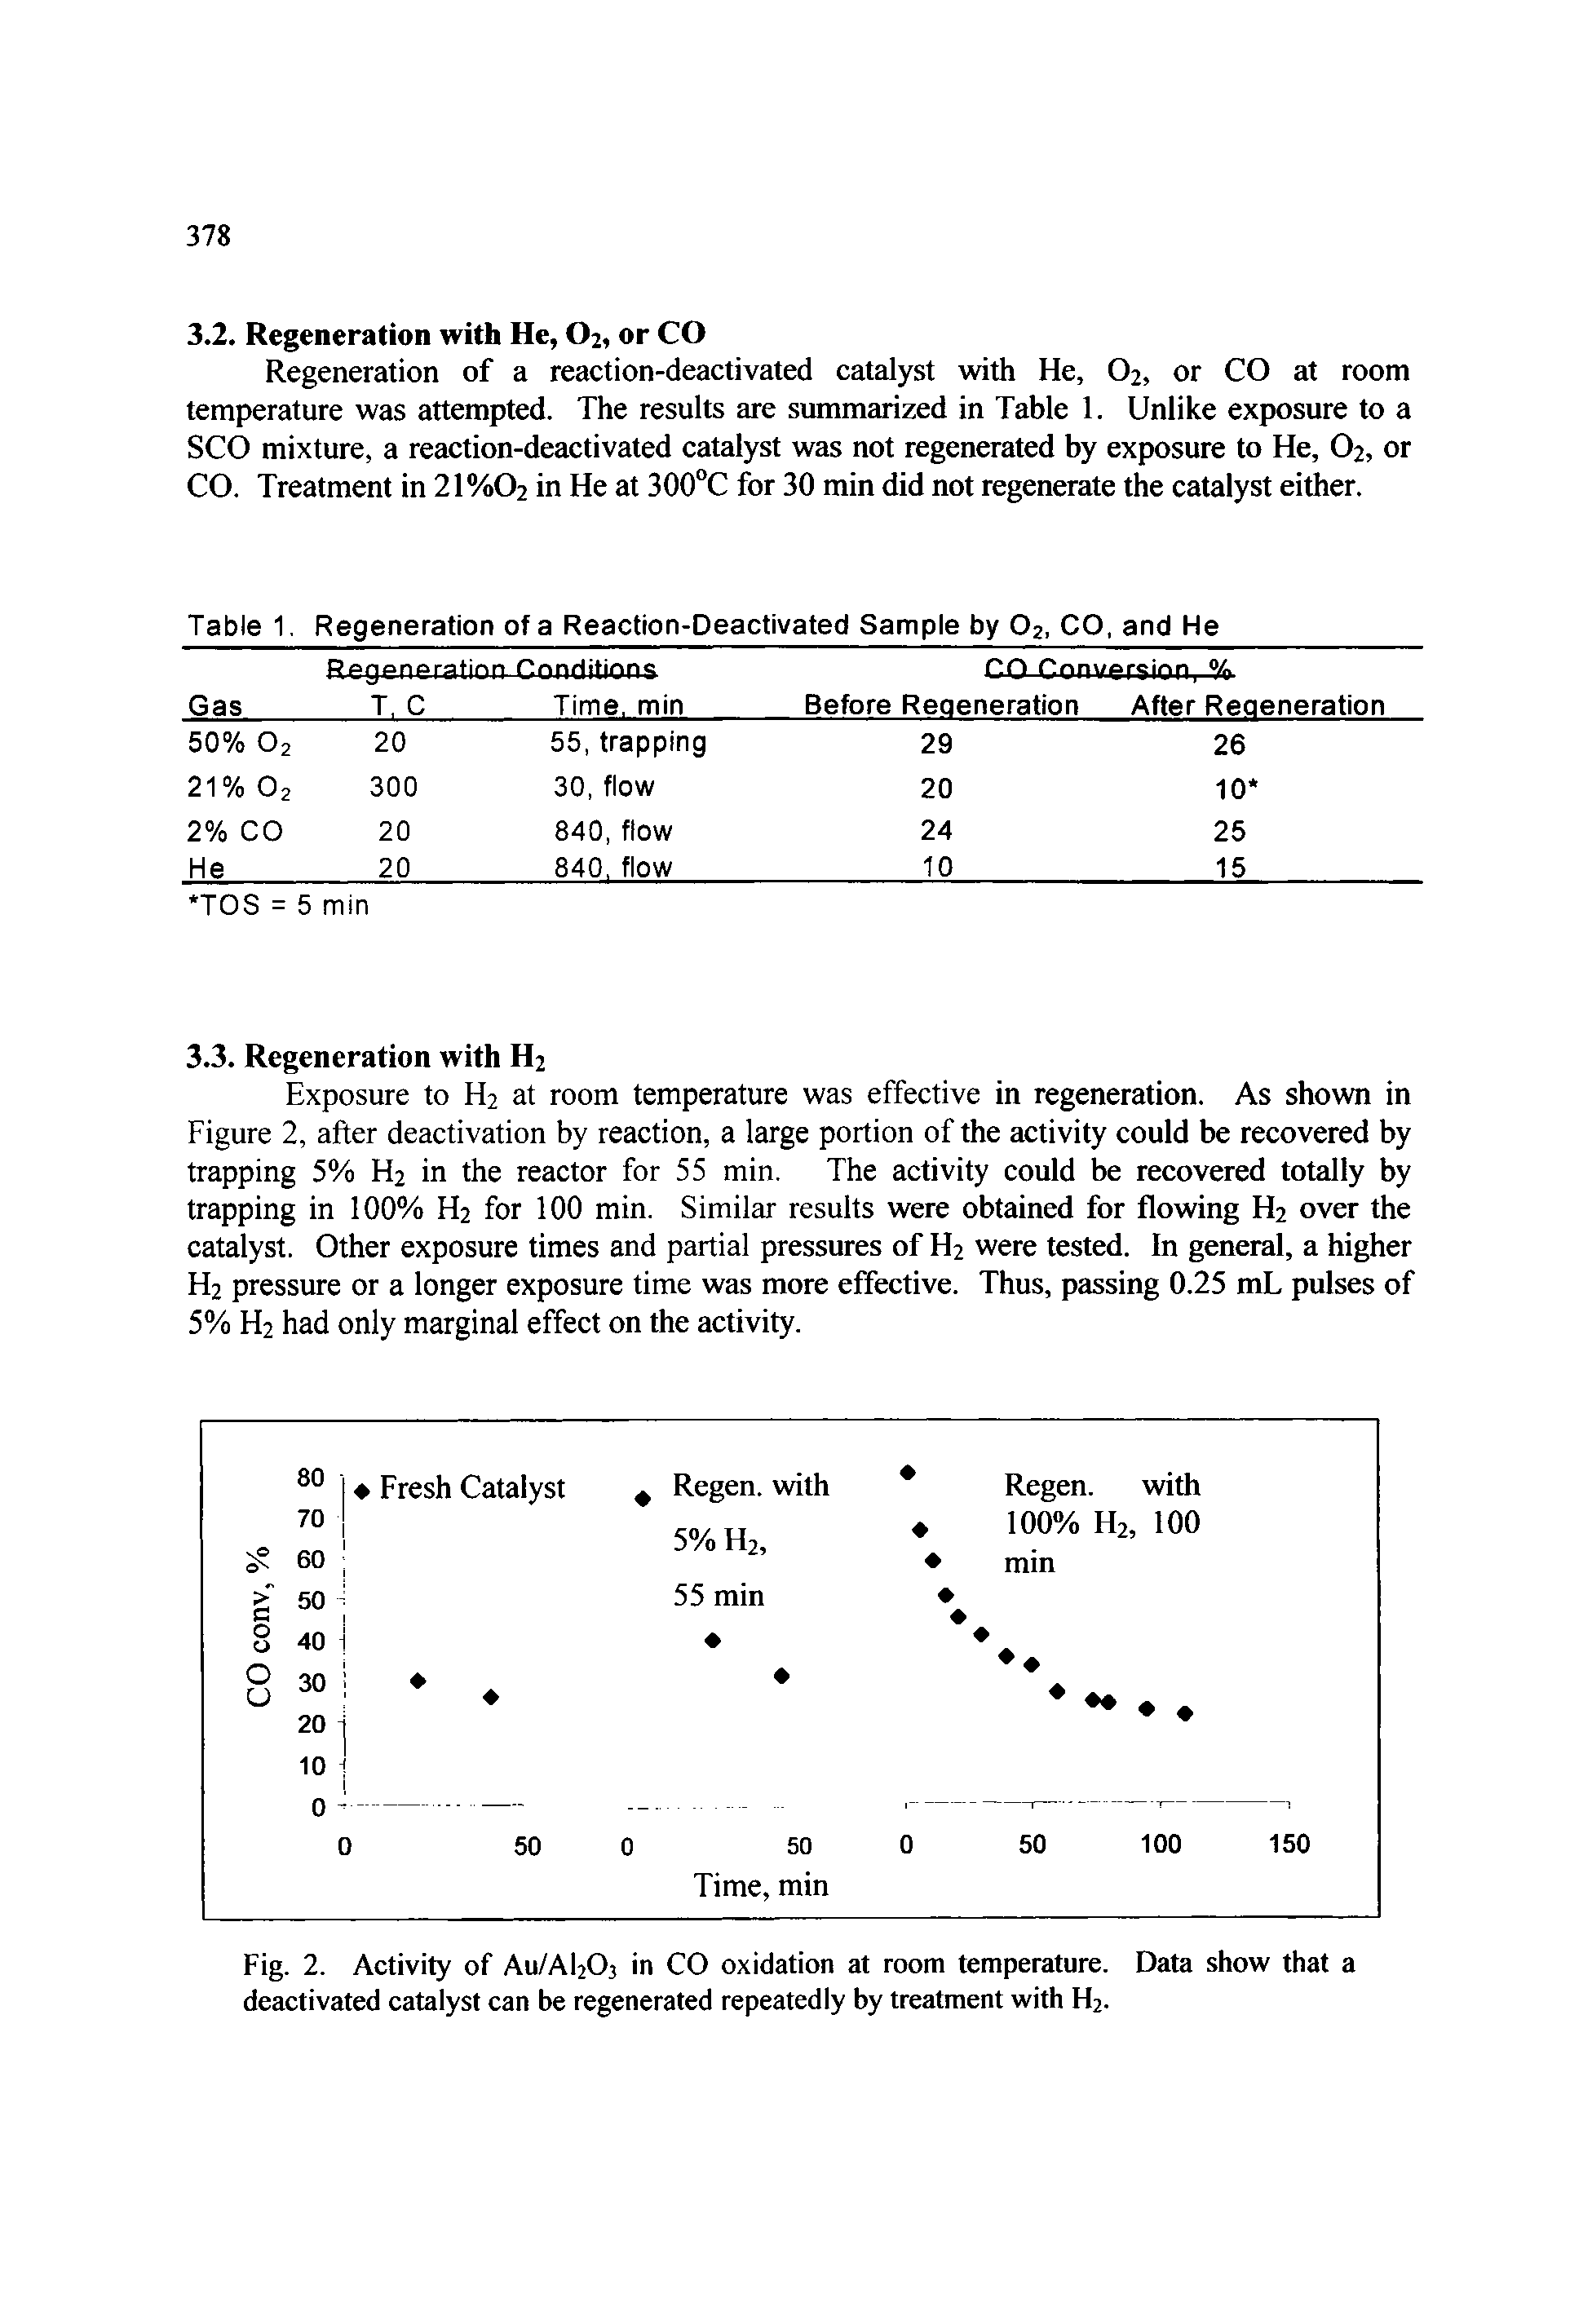 Fig. 2. Activity of Au/AbOj in CO oxidation at room temperature. Data show that a deactivated catalyst can be regenerated repeatedly by treatment with H2.